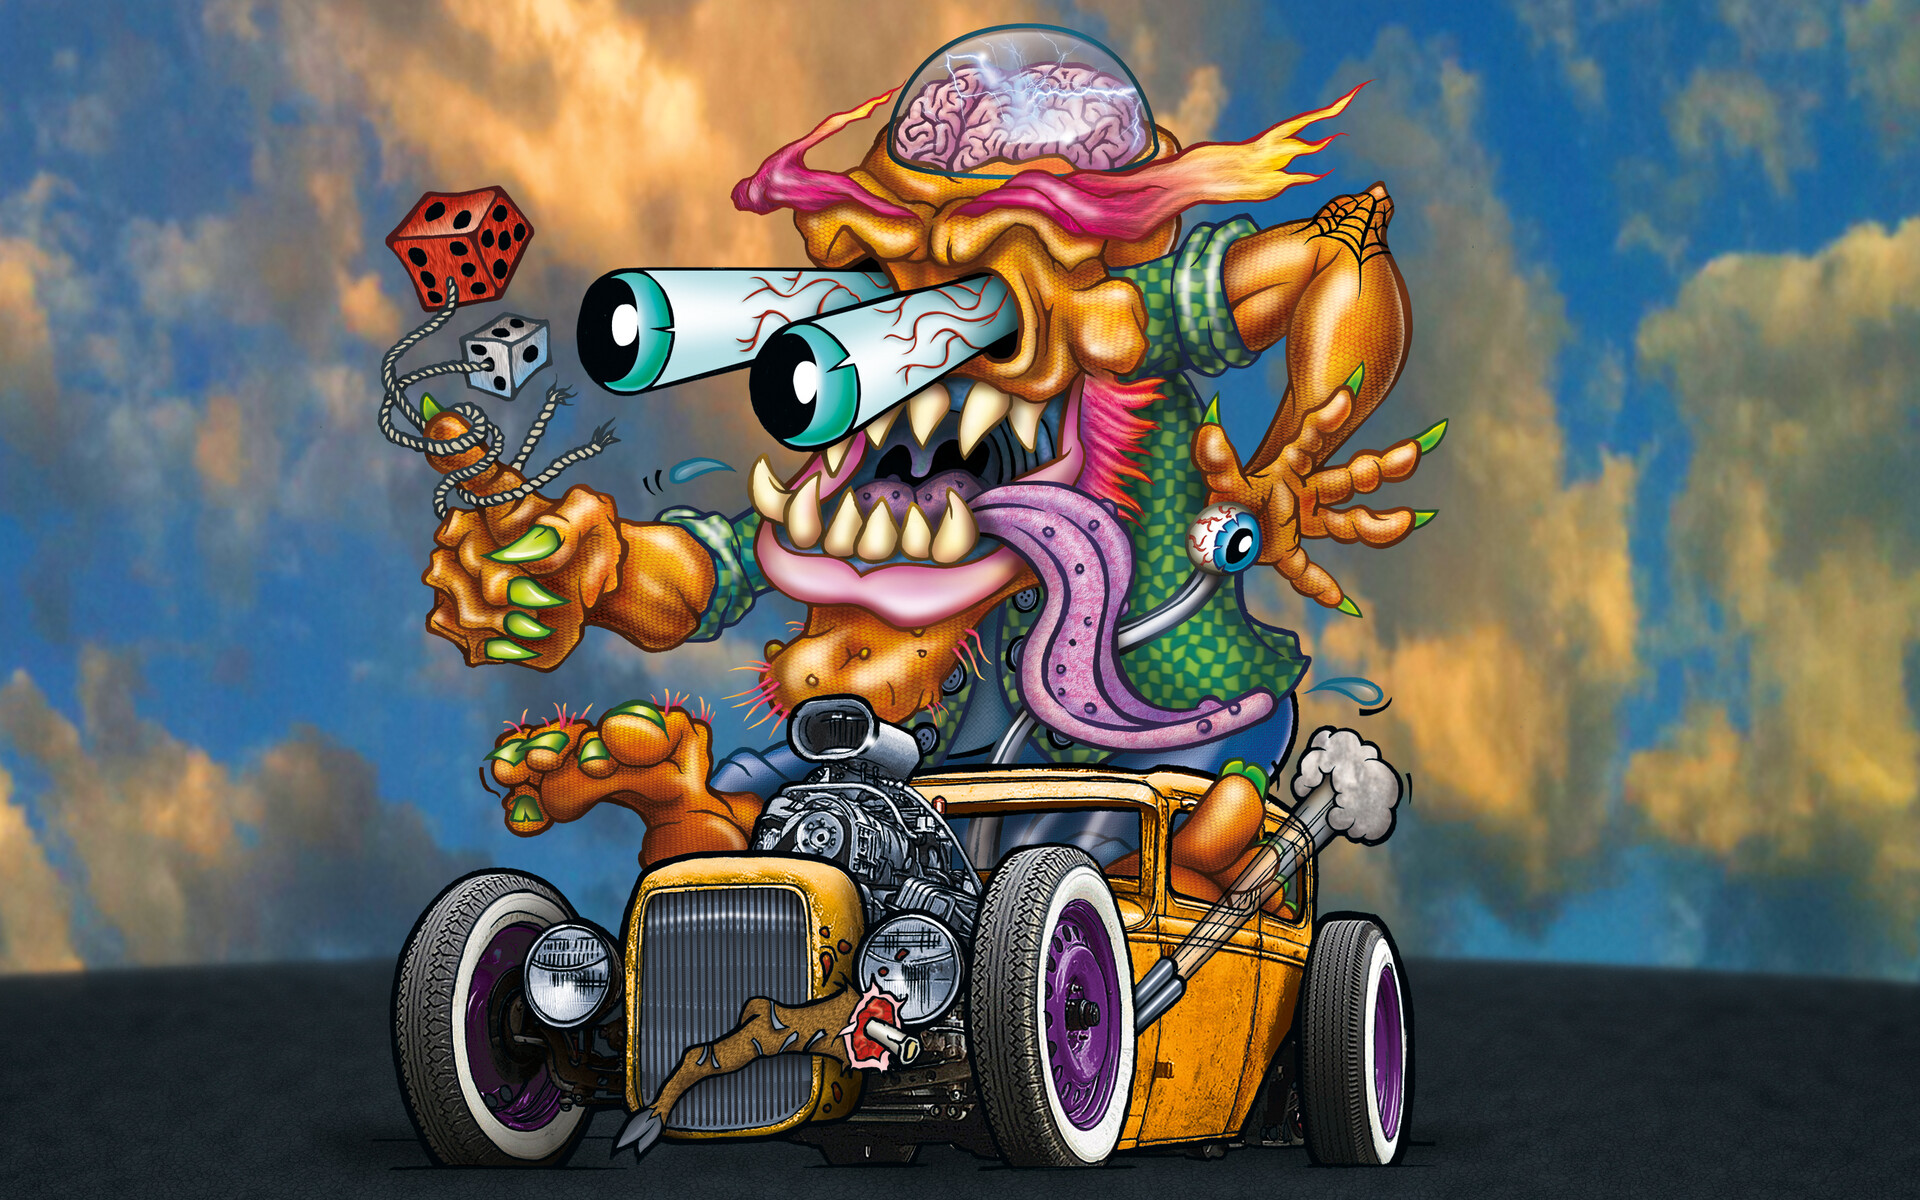 I always loved the Rat Fink characters by "Big Daddy" Ed ...